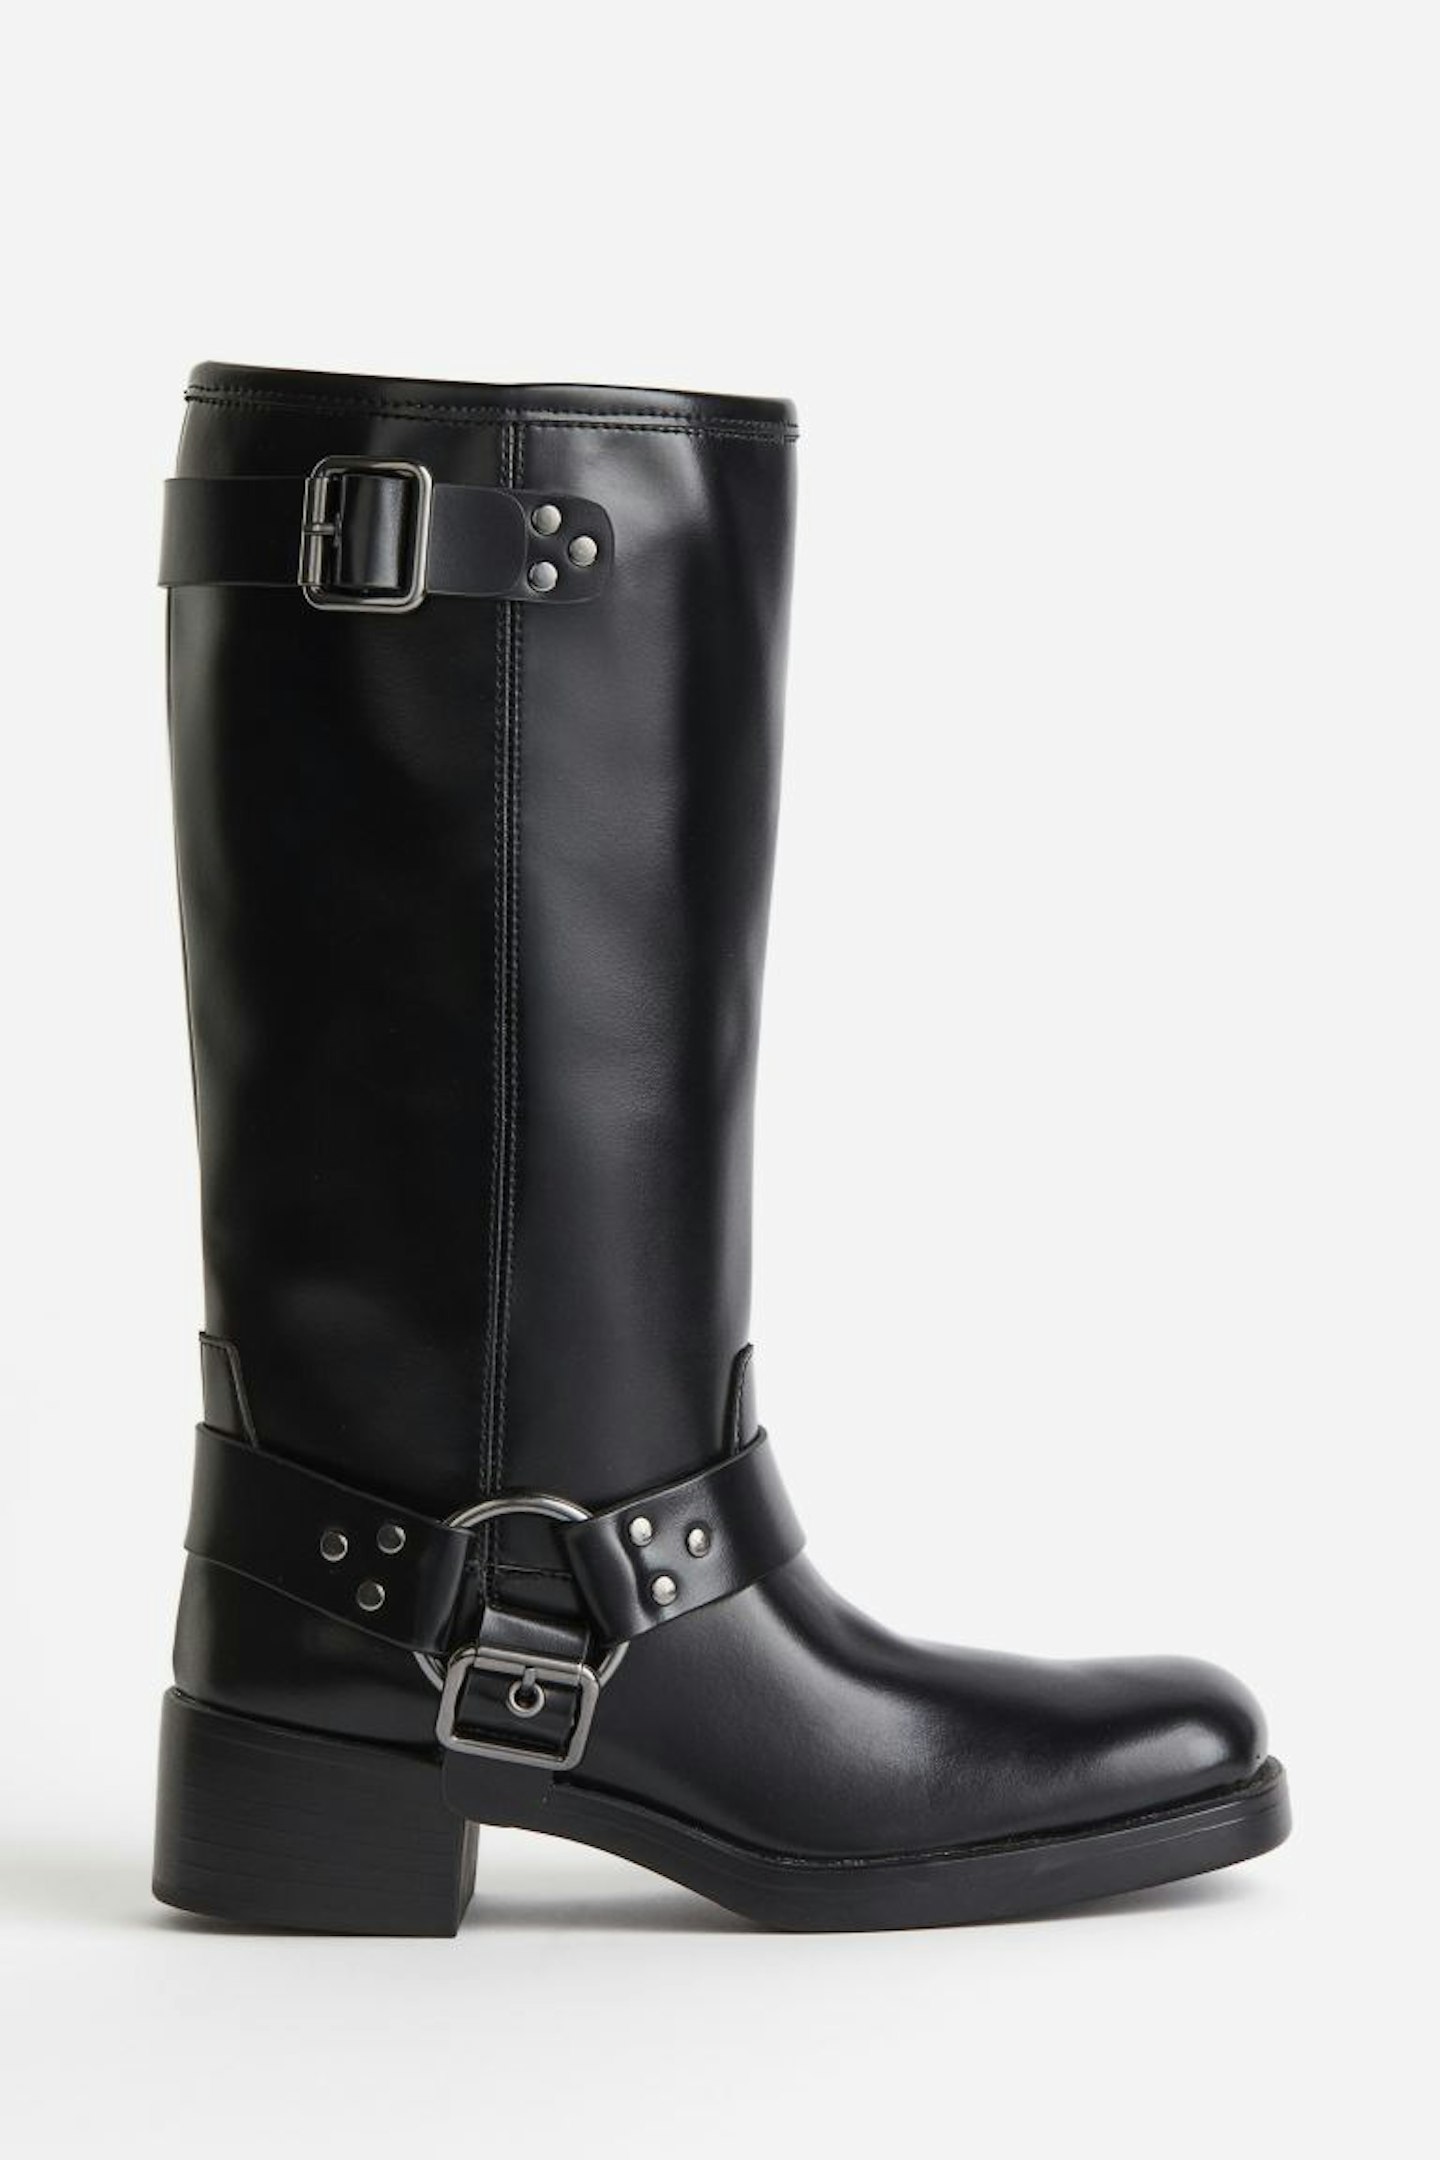 These Women's Biker Boots Will Make All Your Outfits Look Cooler